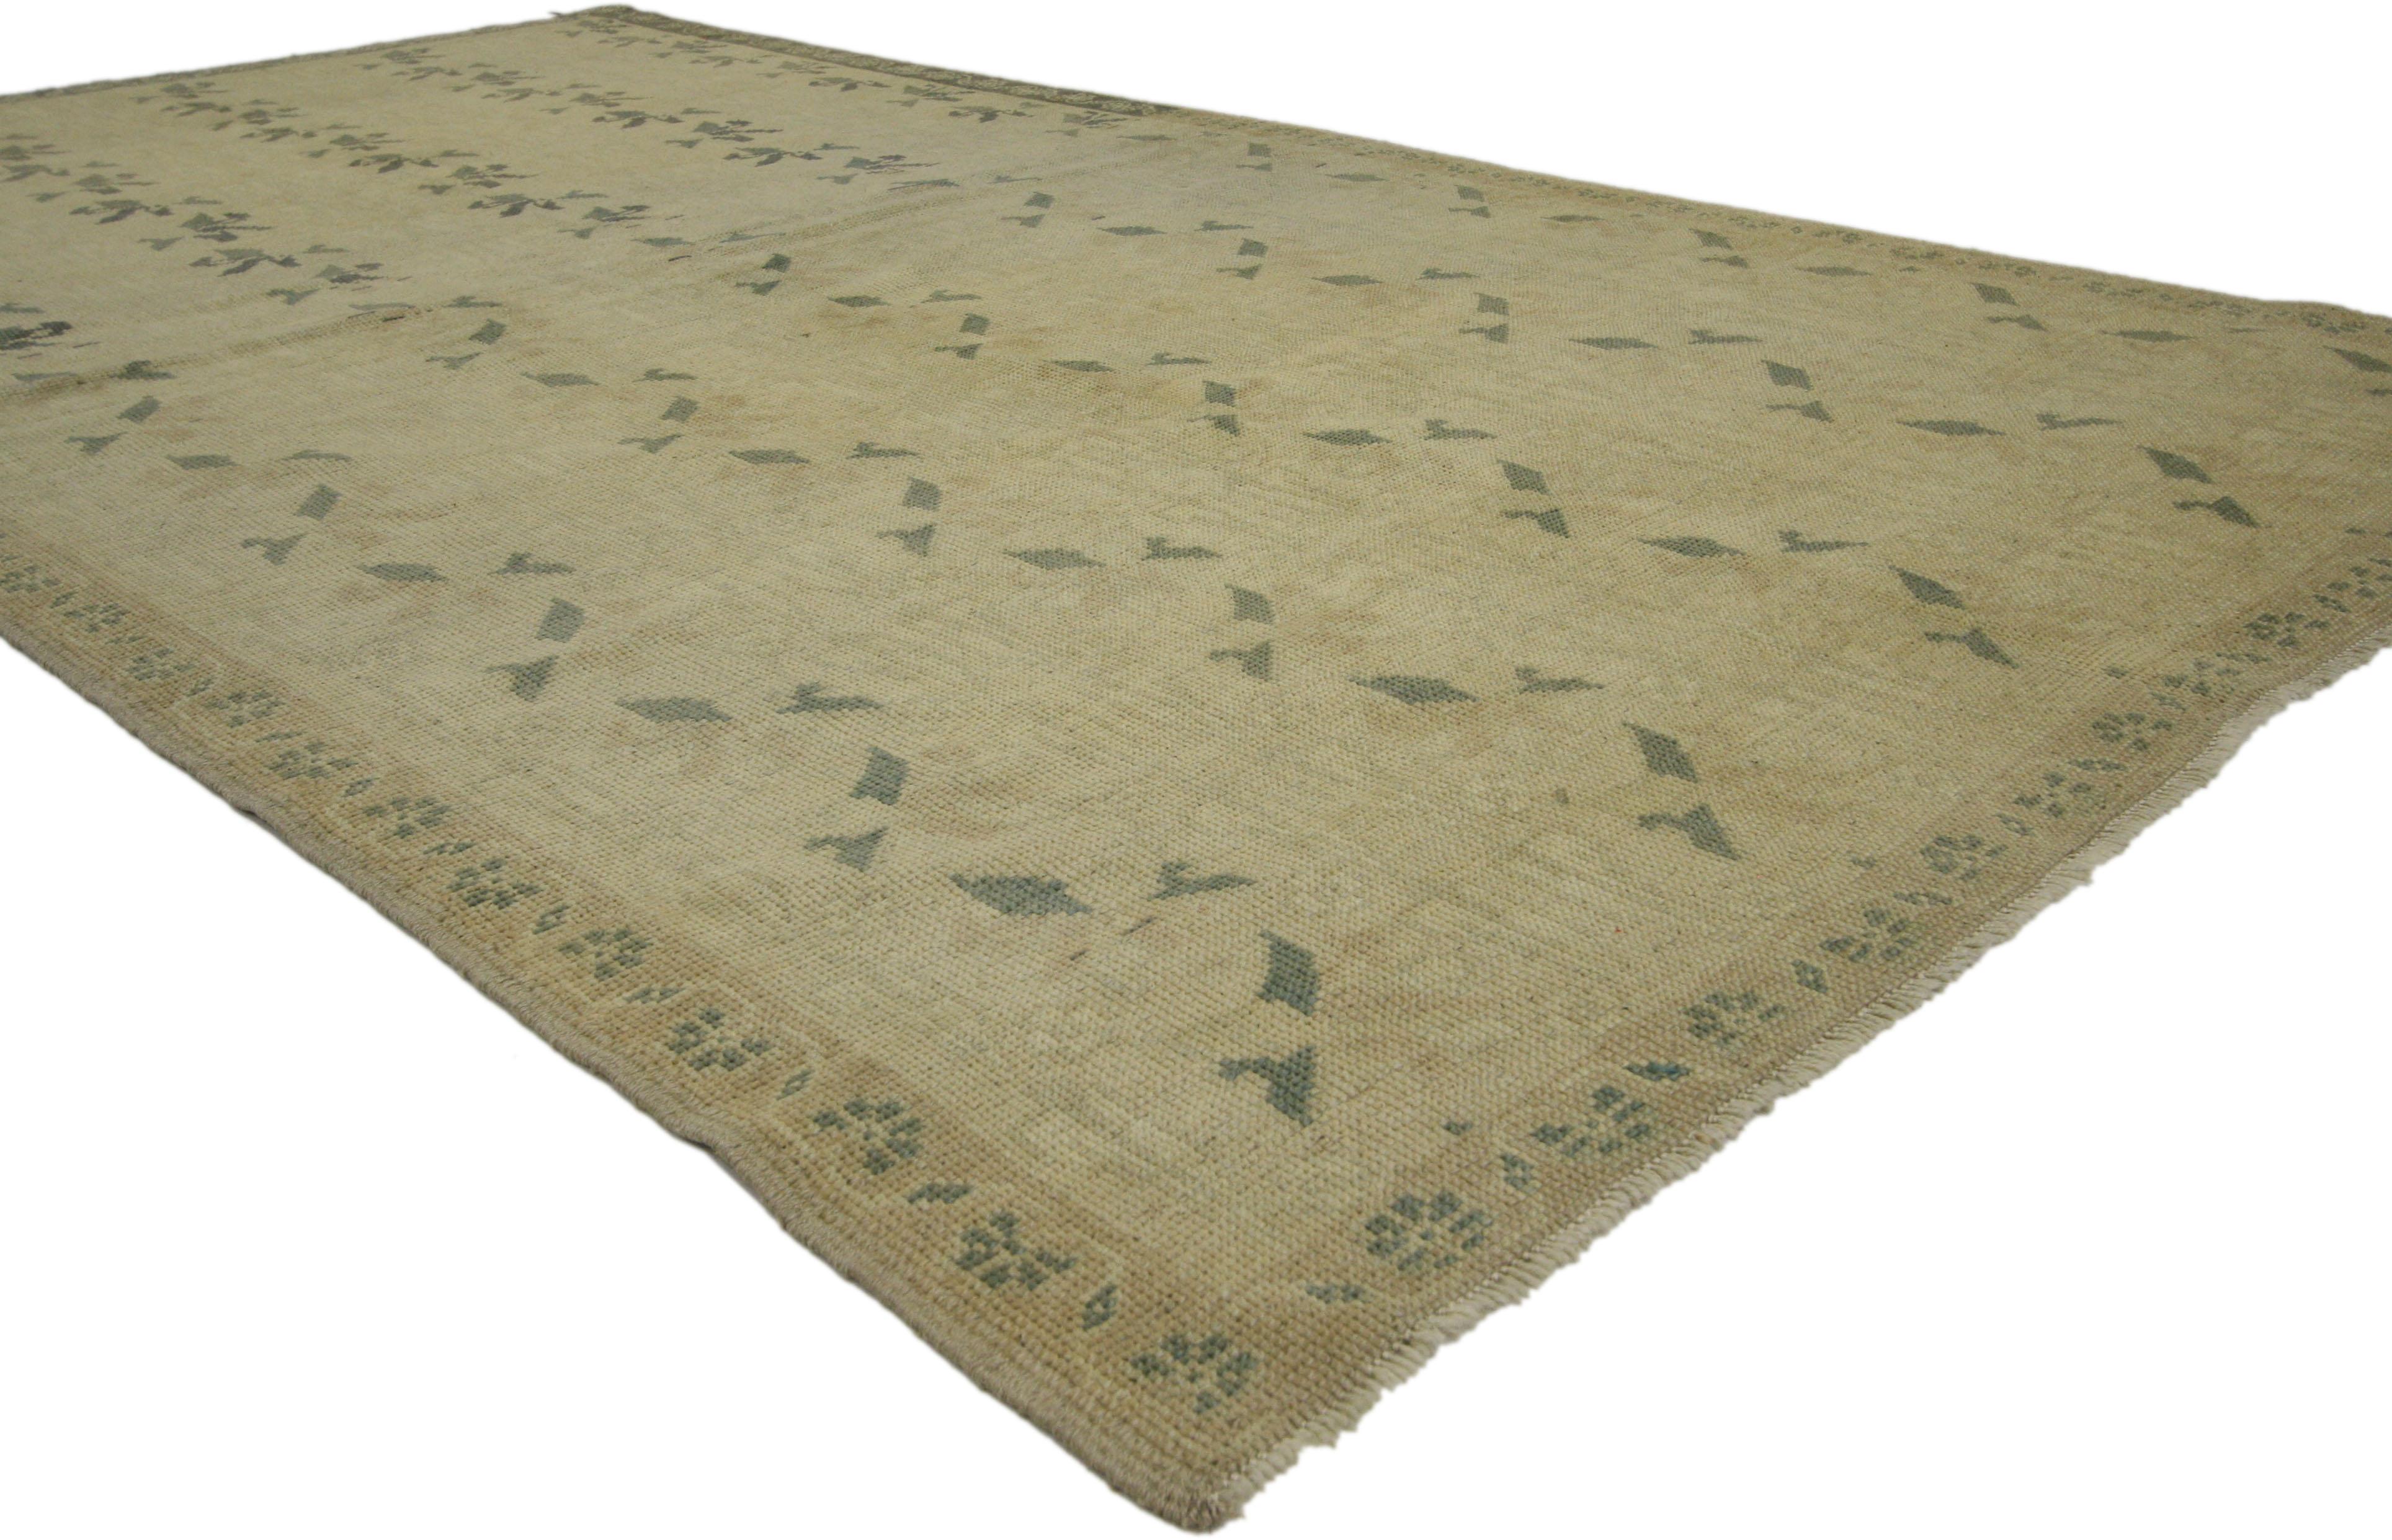 50848, vintage Turkish Oushak rug with Swedish Farmhouse Cottage style. This hand knotted wool vintage Turkish Oushak rug features five columns of leafy tendrils in an organized pattern on a golden ecru field. Floral bouquets add a warm and